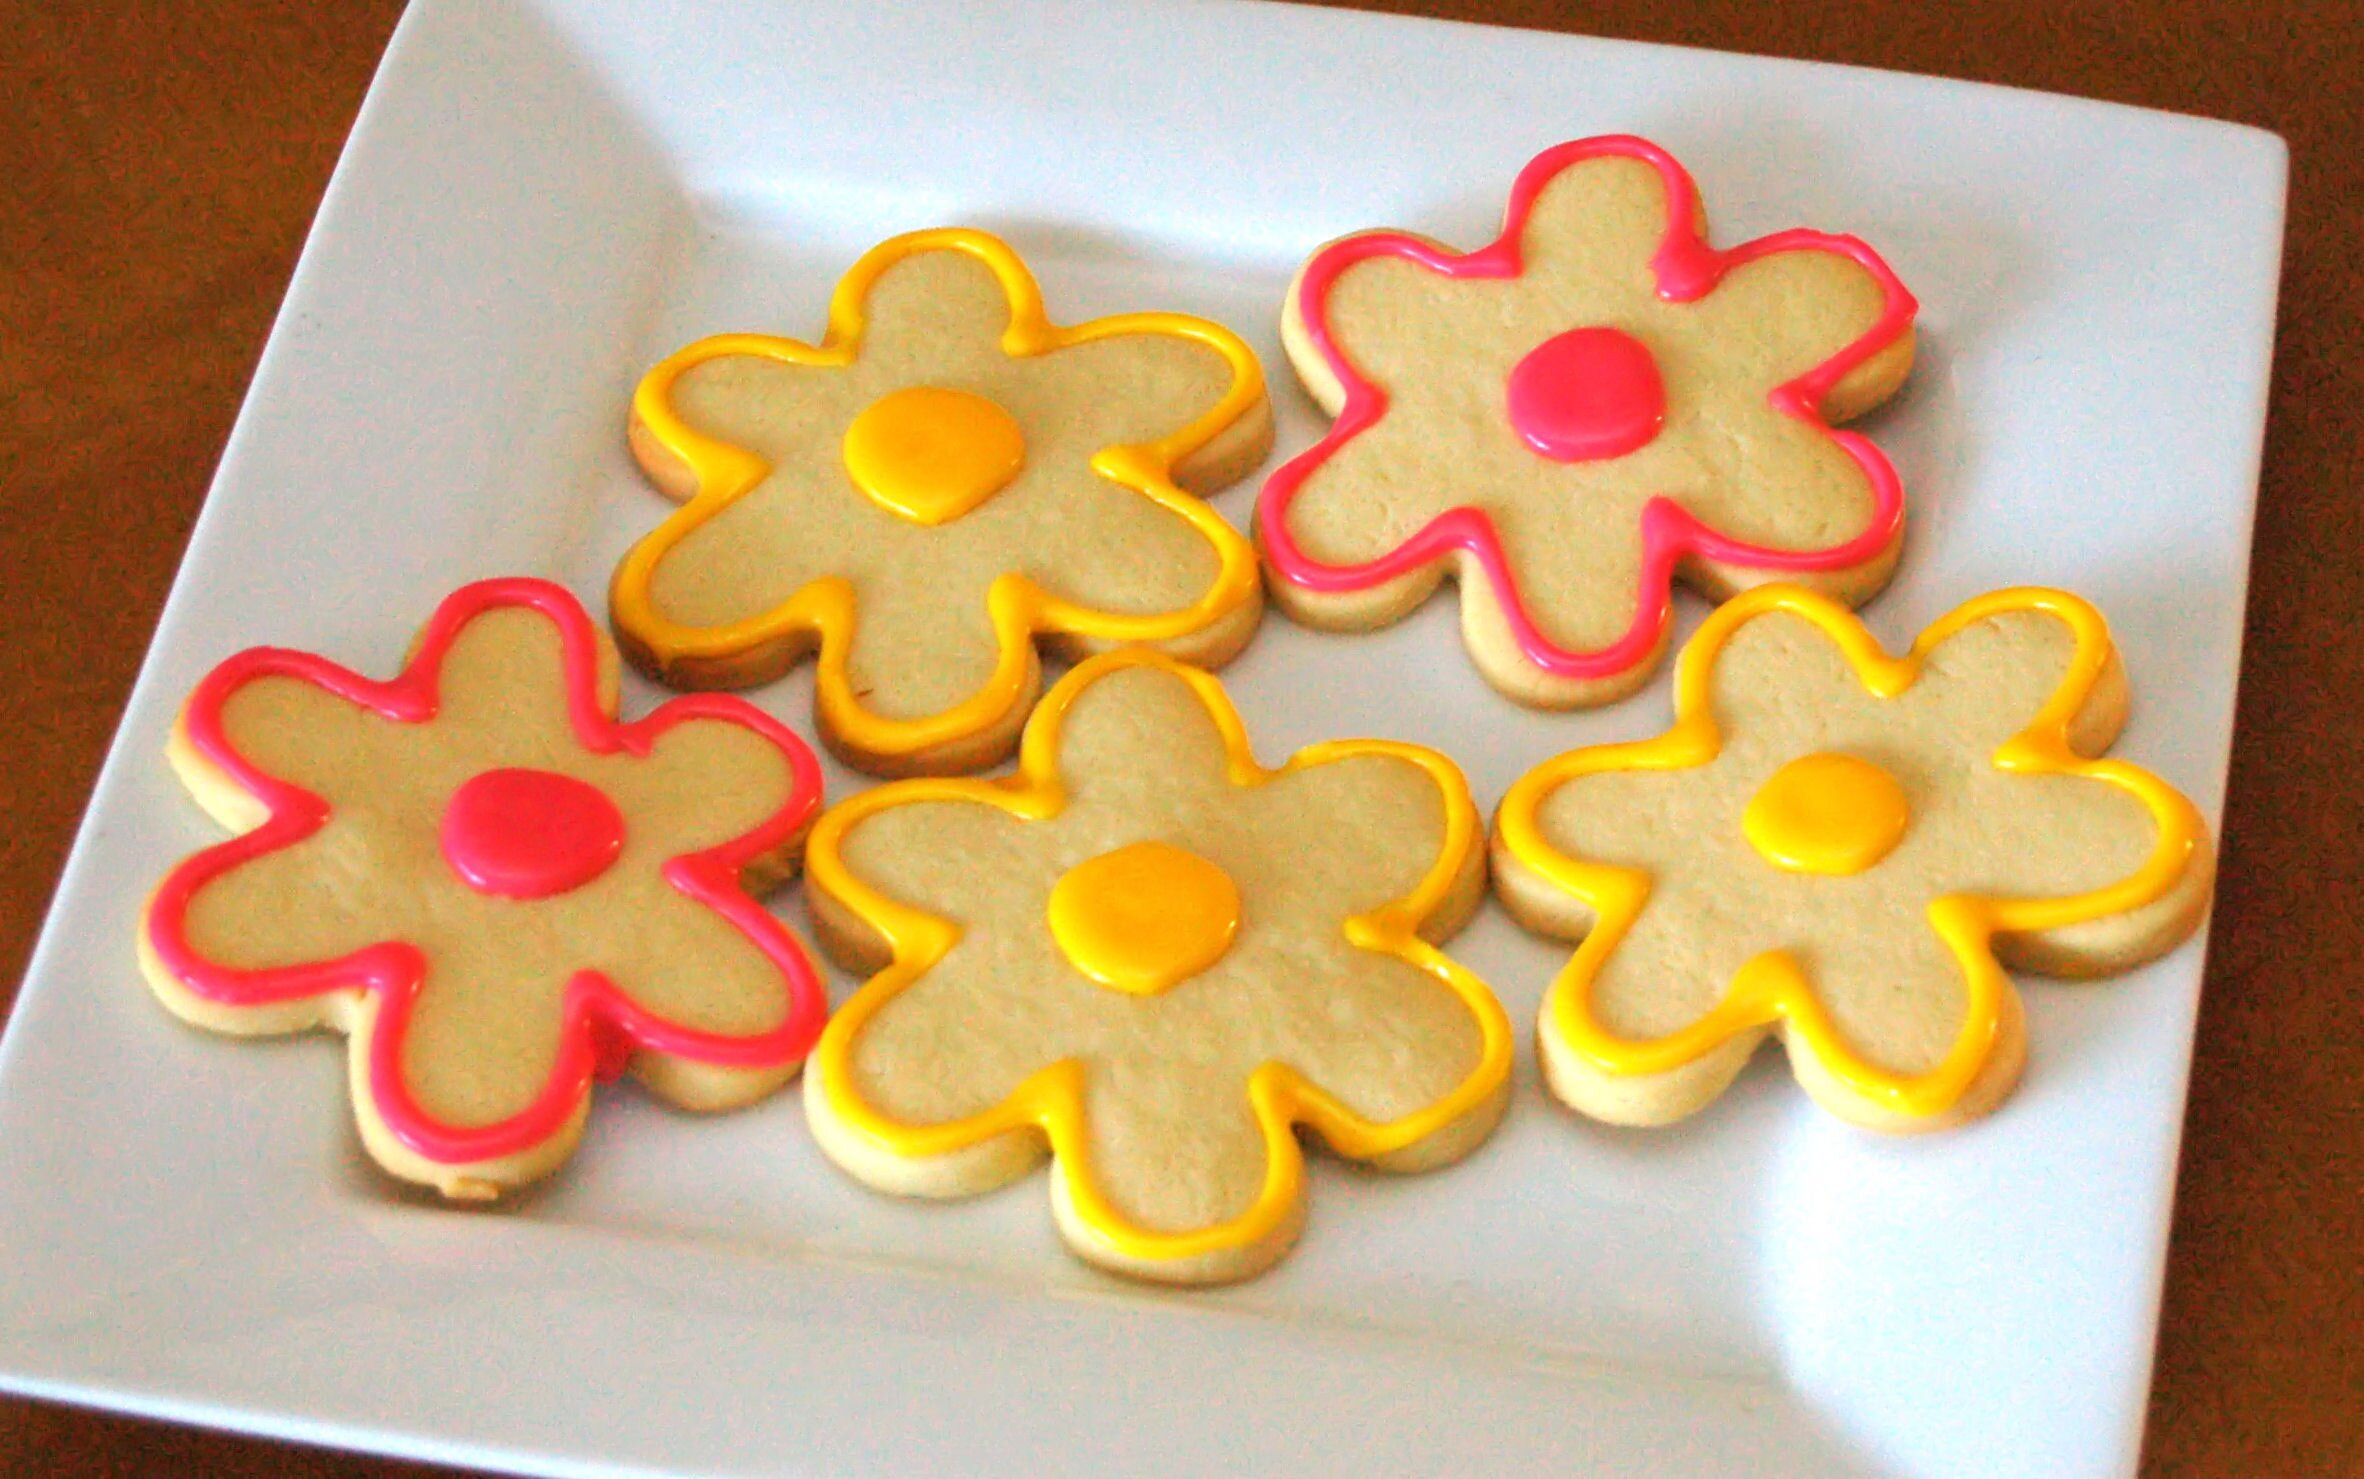 The Humble, but delicious, Sugar Cookie